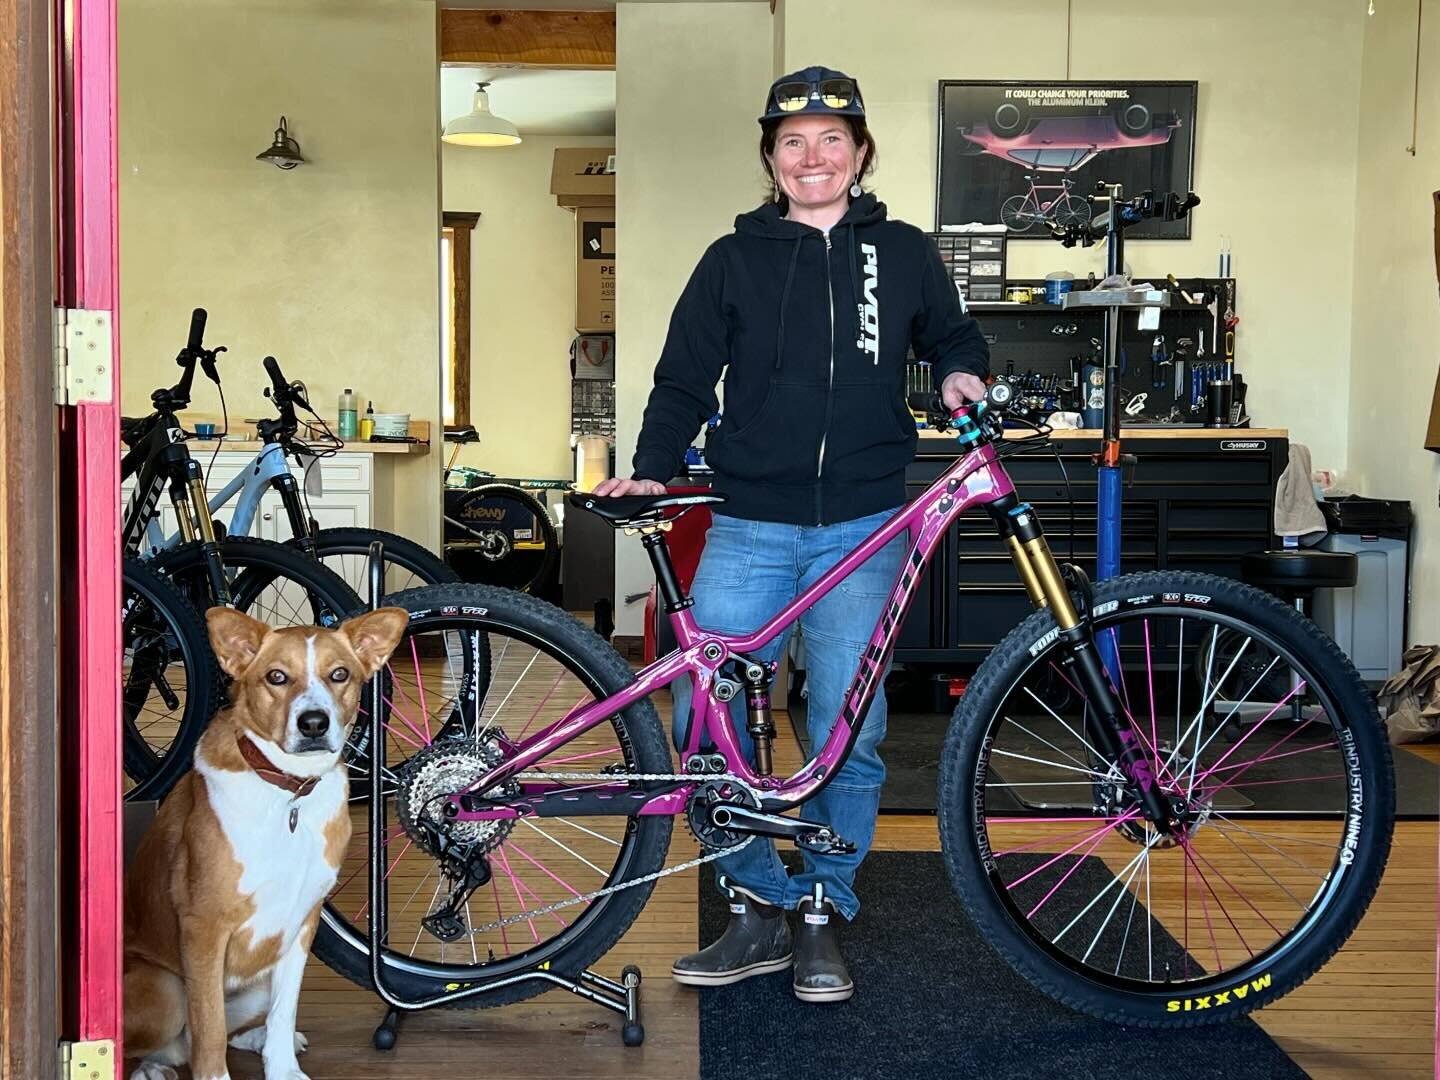 New bike day just in time for spring break! Will, Hank and I have packed the truck to camp and ride bikes down in the desert and check out of work and wifi for a chunk of the week before coming back and chasing a few days of steep spring skiing. 

It